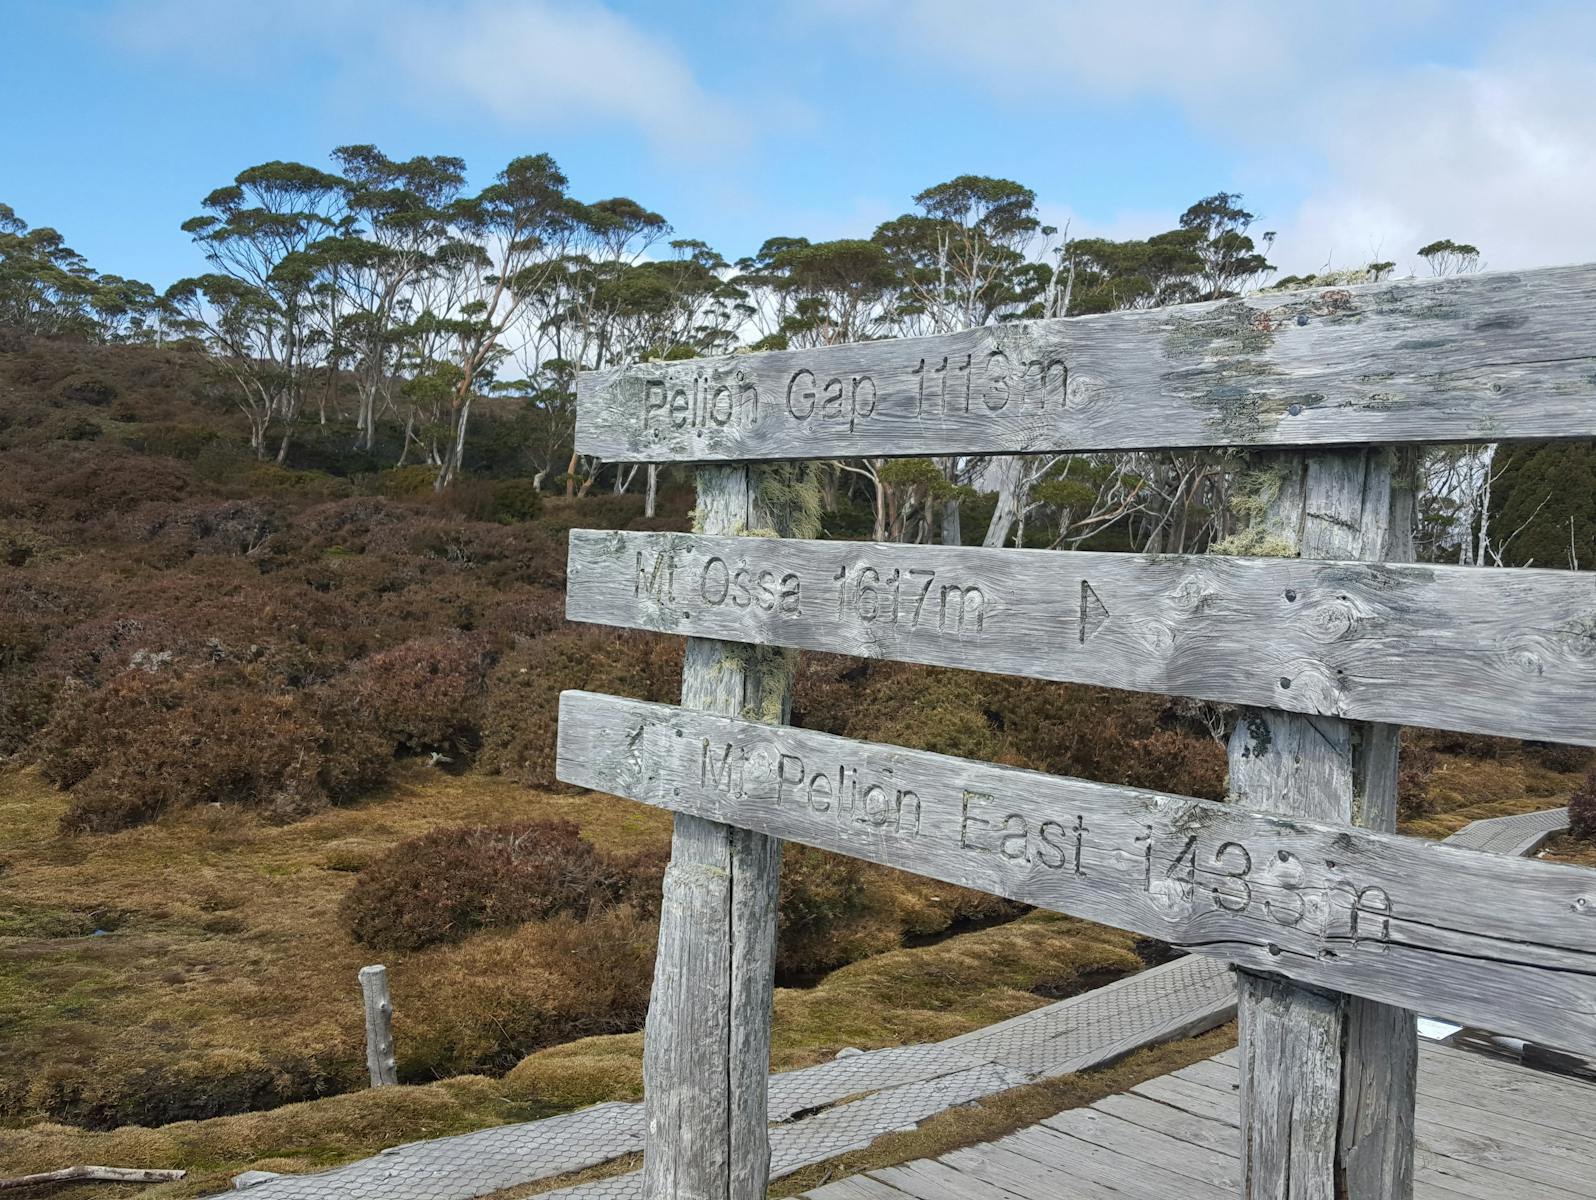 Many side trips on the Overland Track